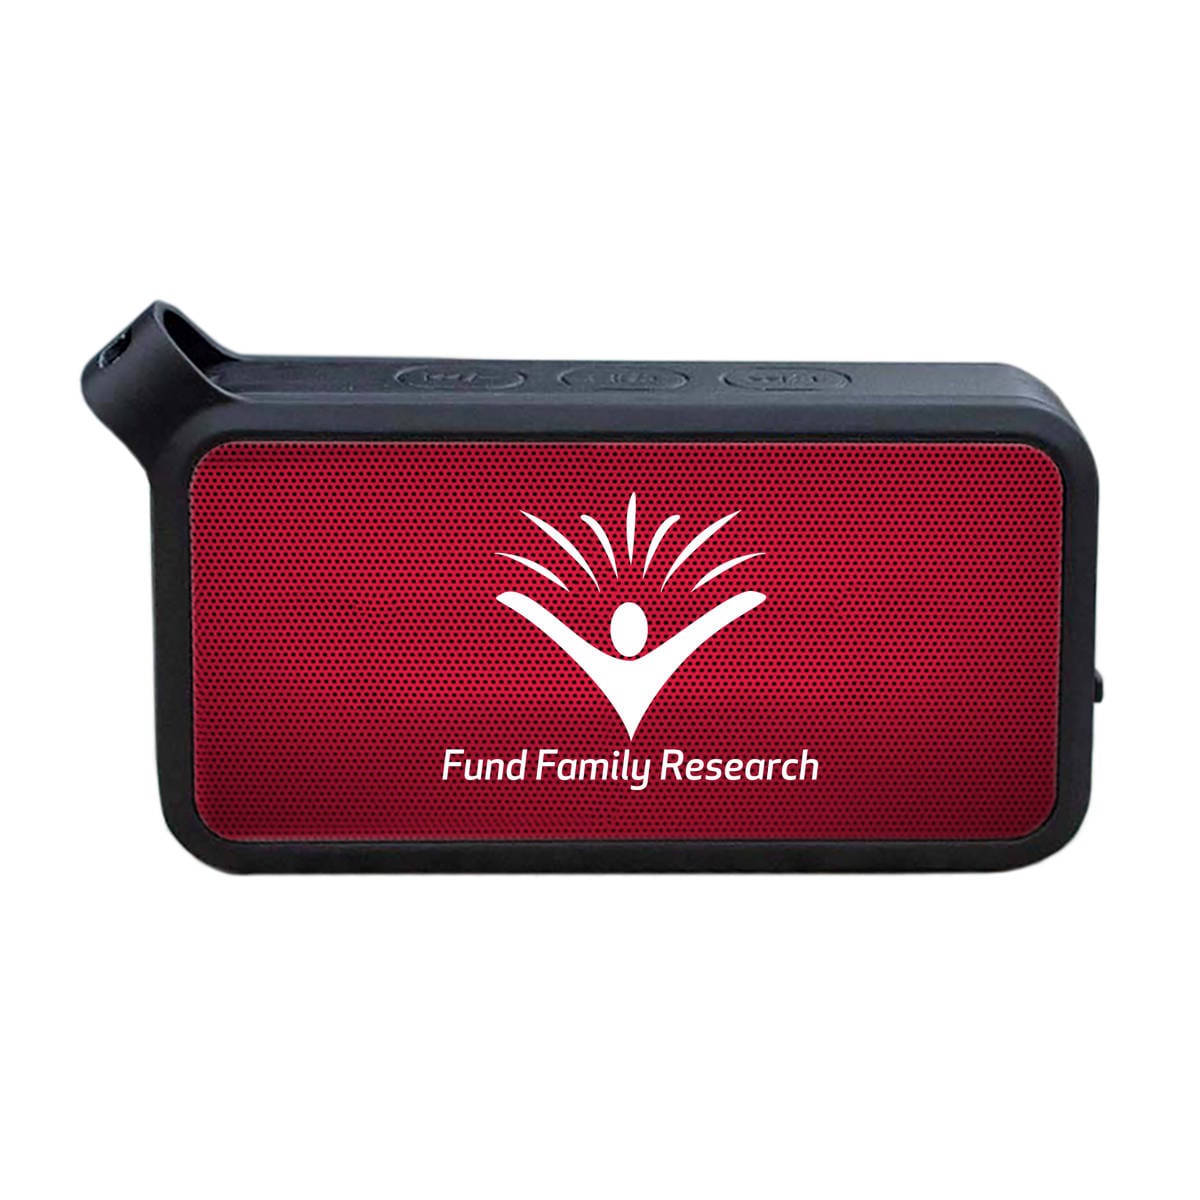 Promotional Waterproof bluetooth speaker Personalized With Your Custom Logo